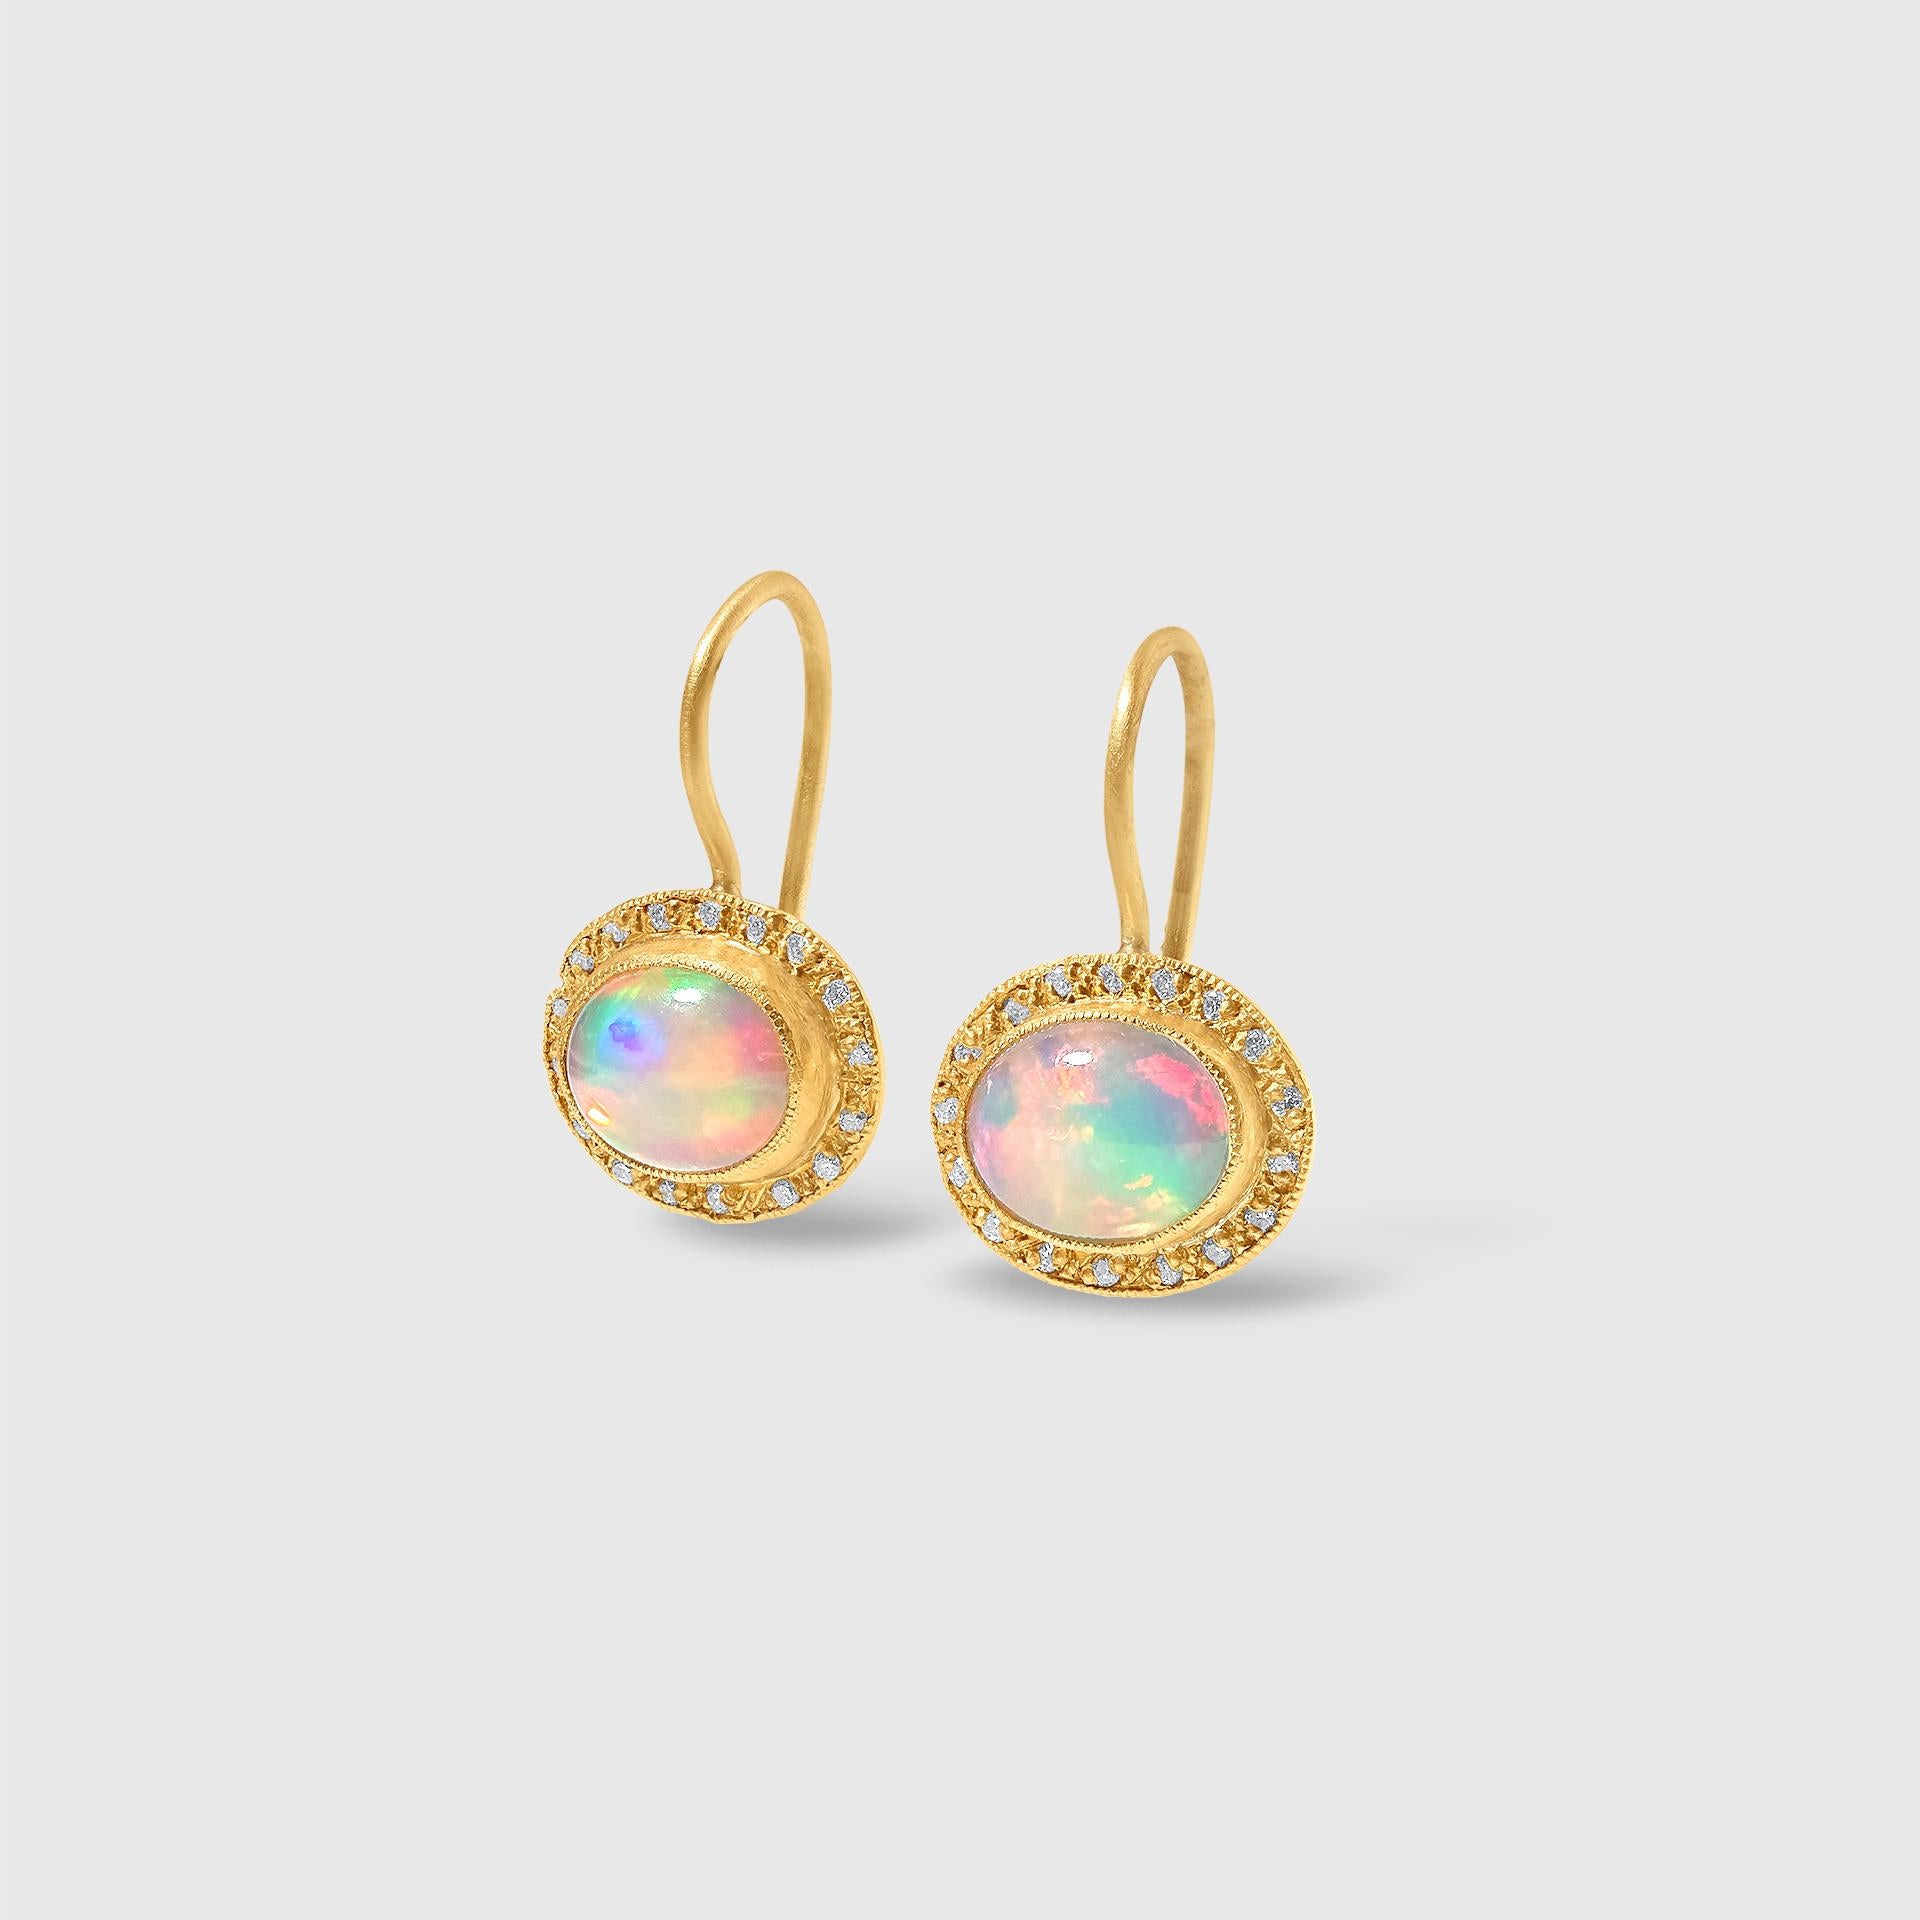 Oval, Opal Drop Earrings with Diamond Framing in 24kt Gold by Prehistoric Works of Istanbul, Turkey. Measurements: Total Length, 20mm (.8